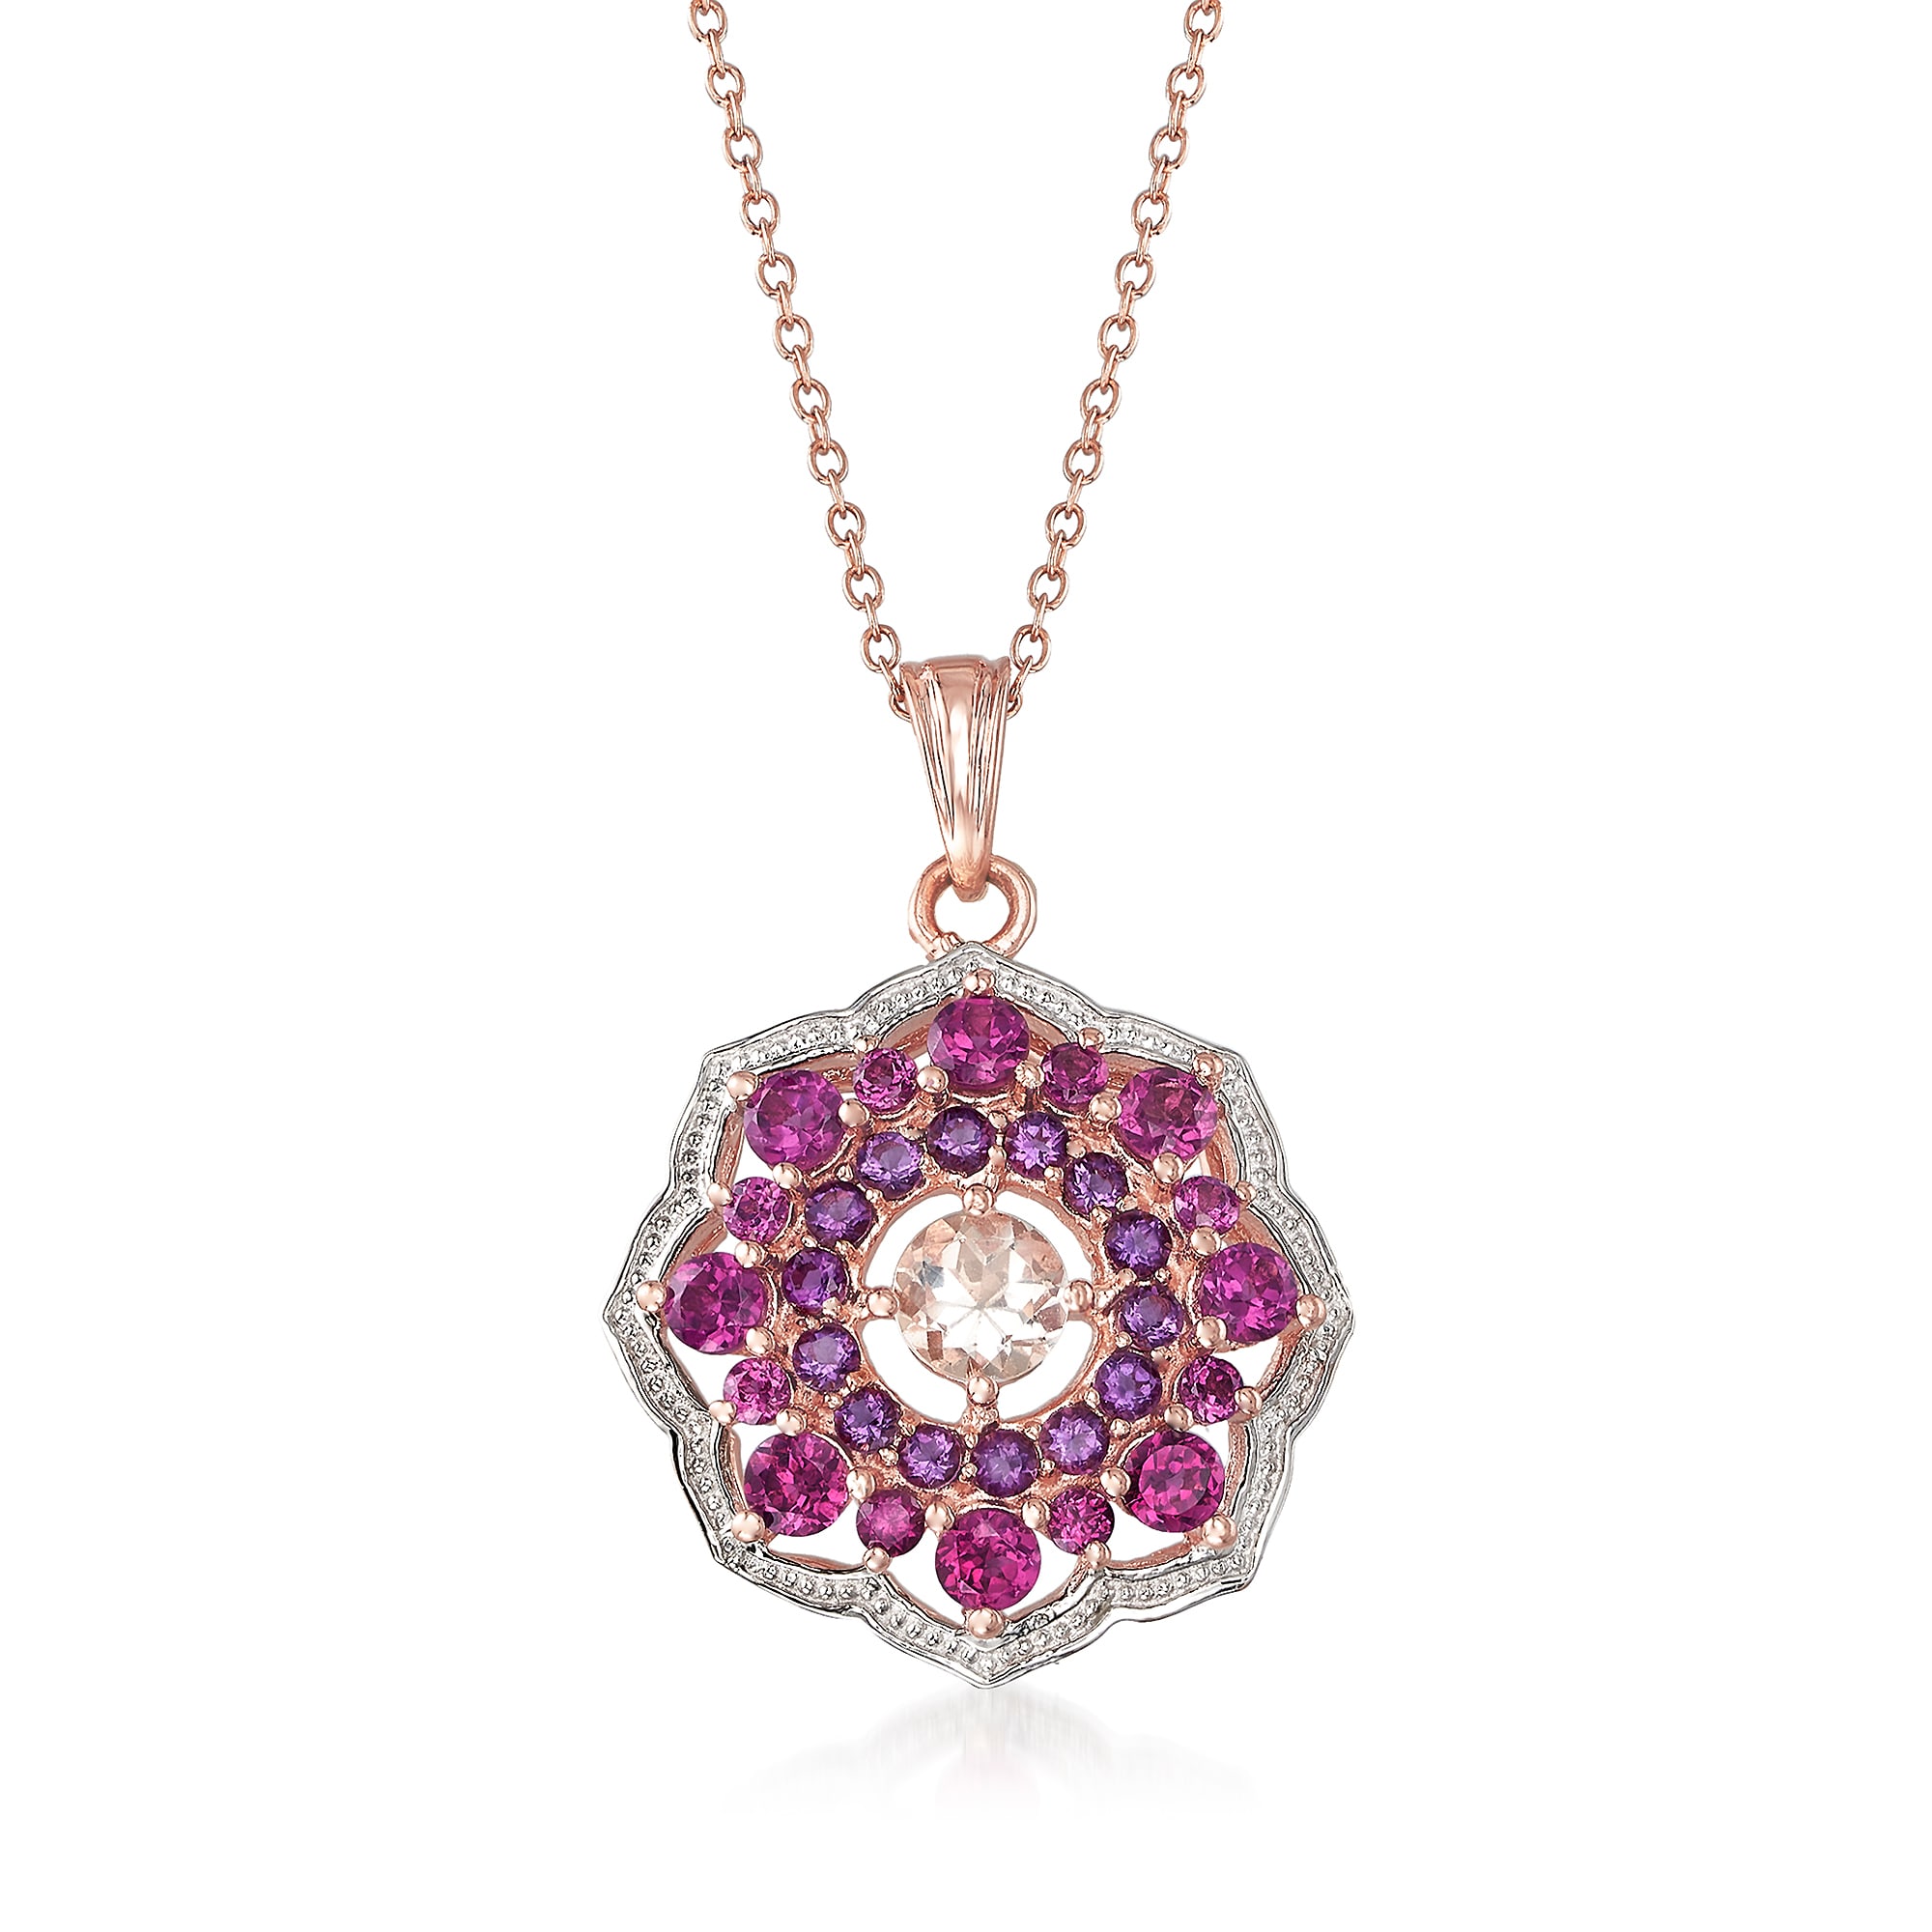 1.90 ct. t.w. Multi-Gemstone Pendant Necklace in 18kt Rose Gold